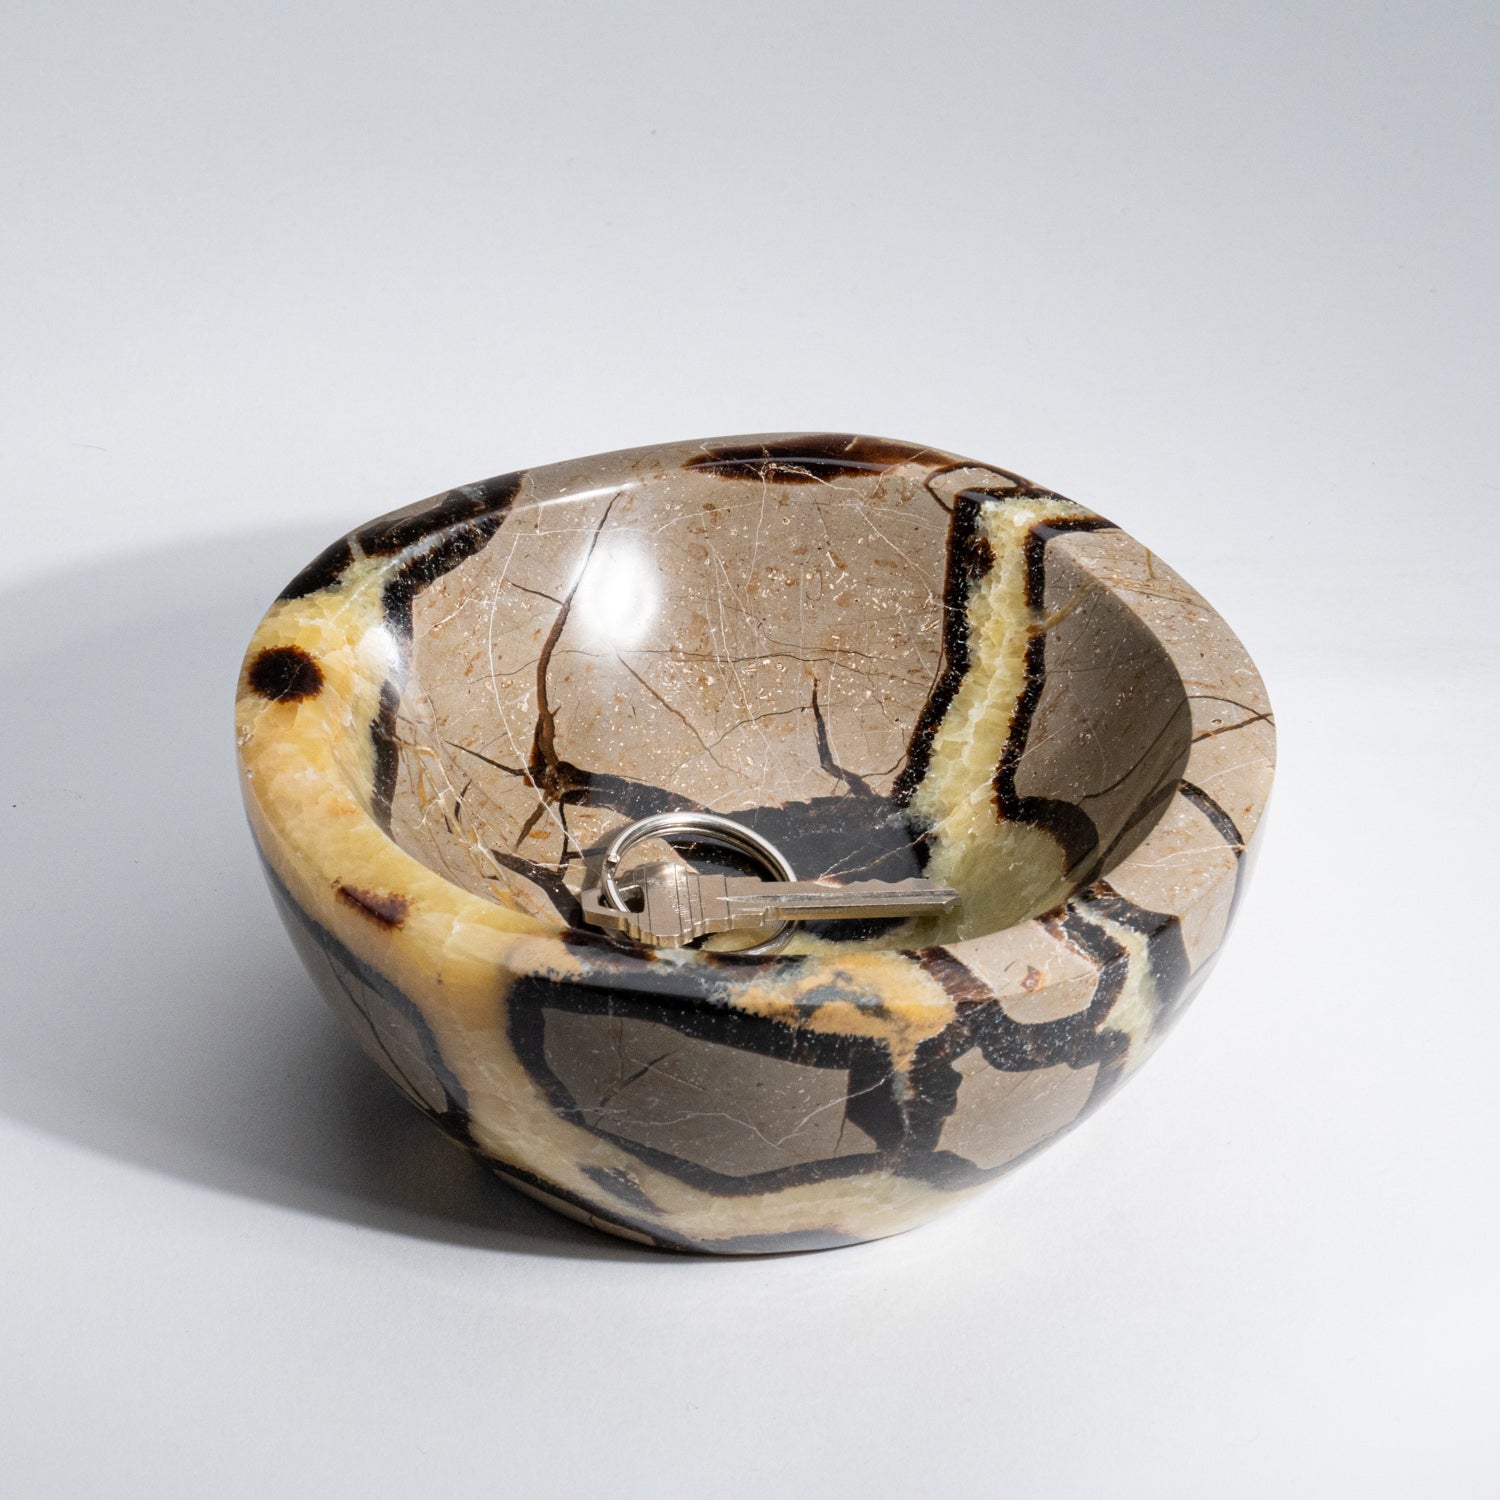 Genuine Polished Septarian Bowl from Madagascar (2 lbs)